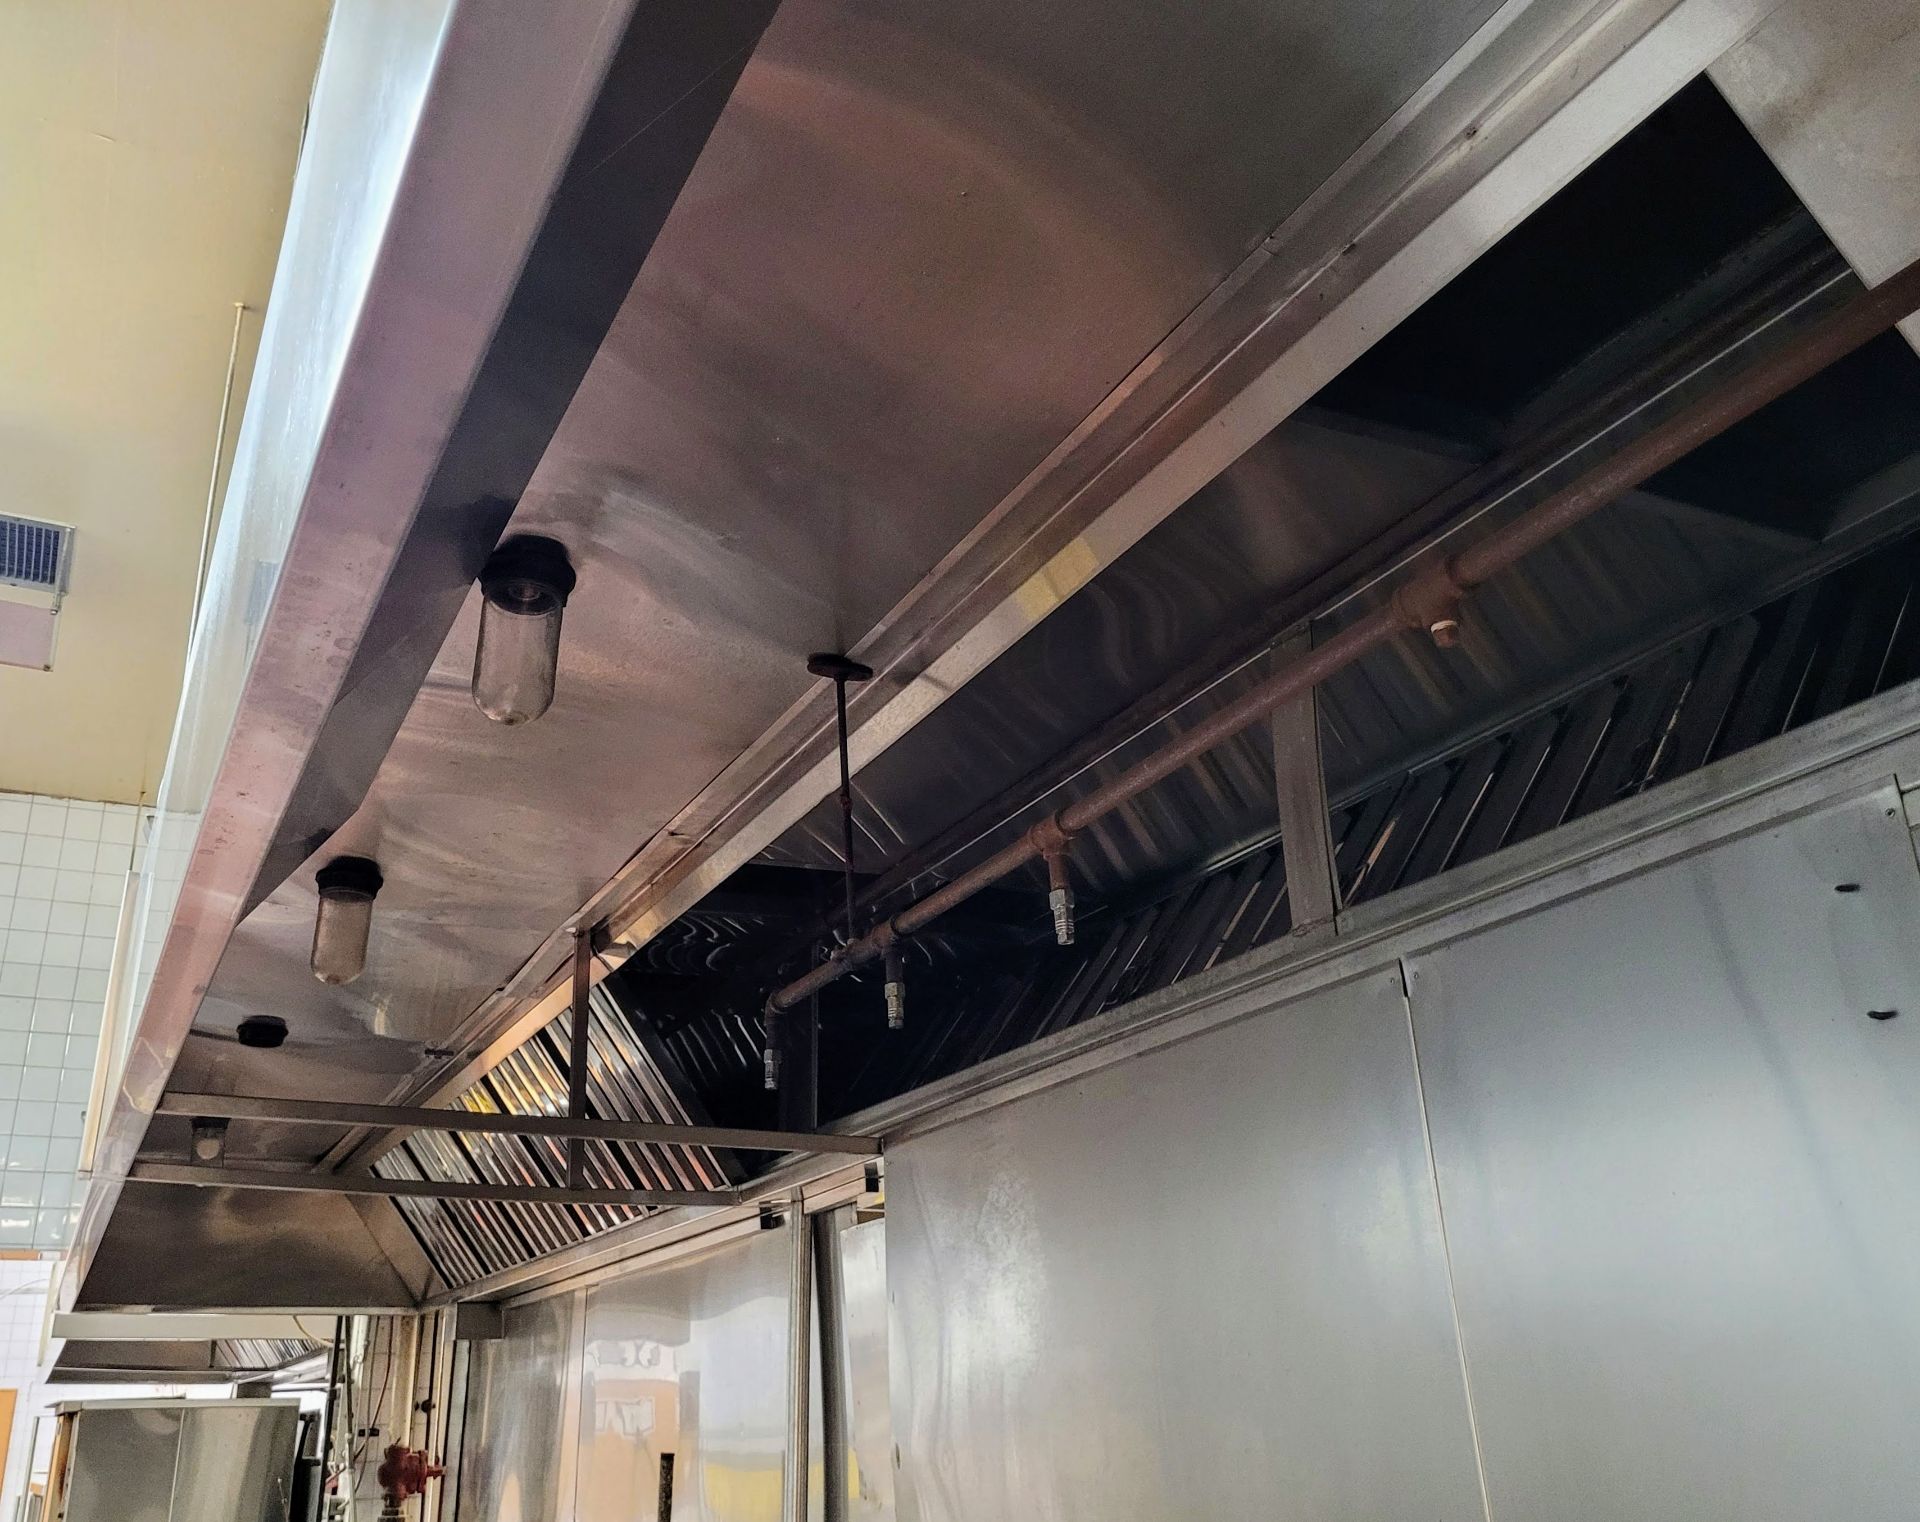 STAINLESS STEEL EXHAUST HOOD W/ FIRE SUPPRESSION, APPROX 20'L X 10'W - Image 4 of 6